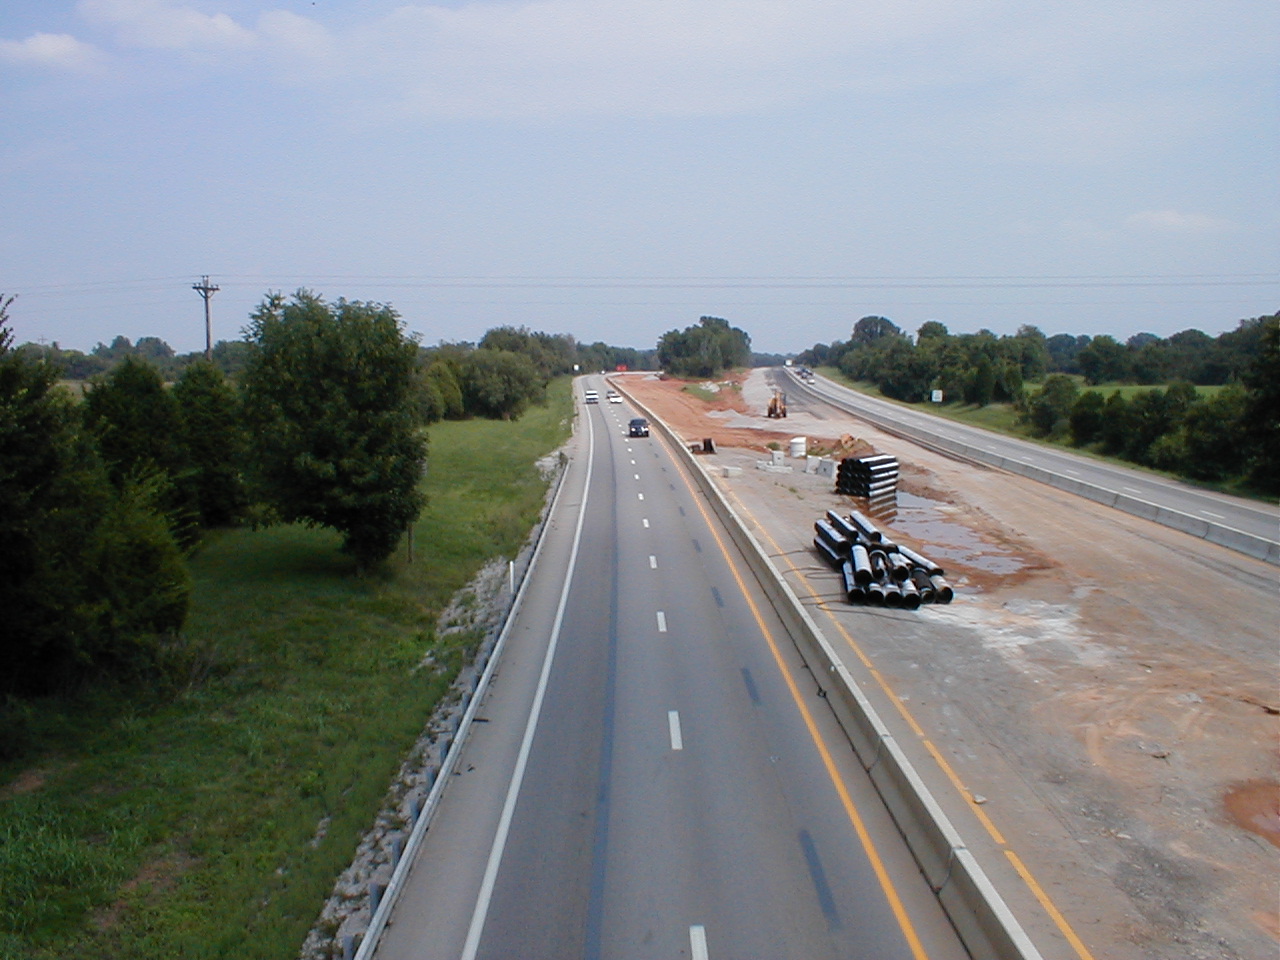 A traffic island on I-65. New lanes being added to both the north and south bound lanes are visible.